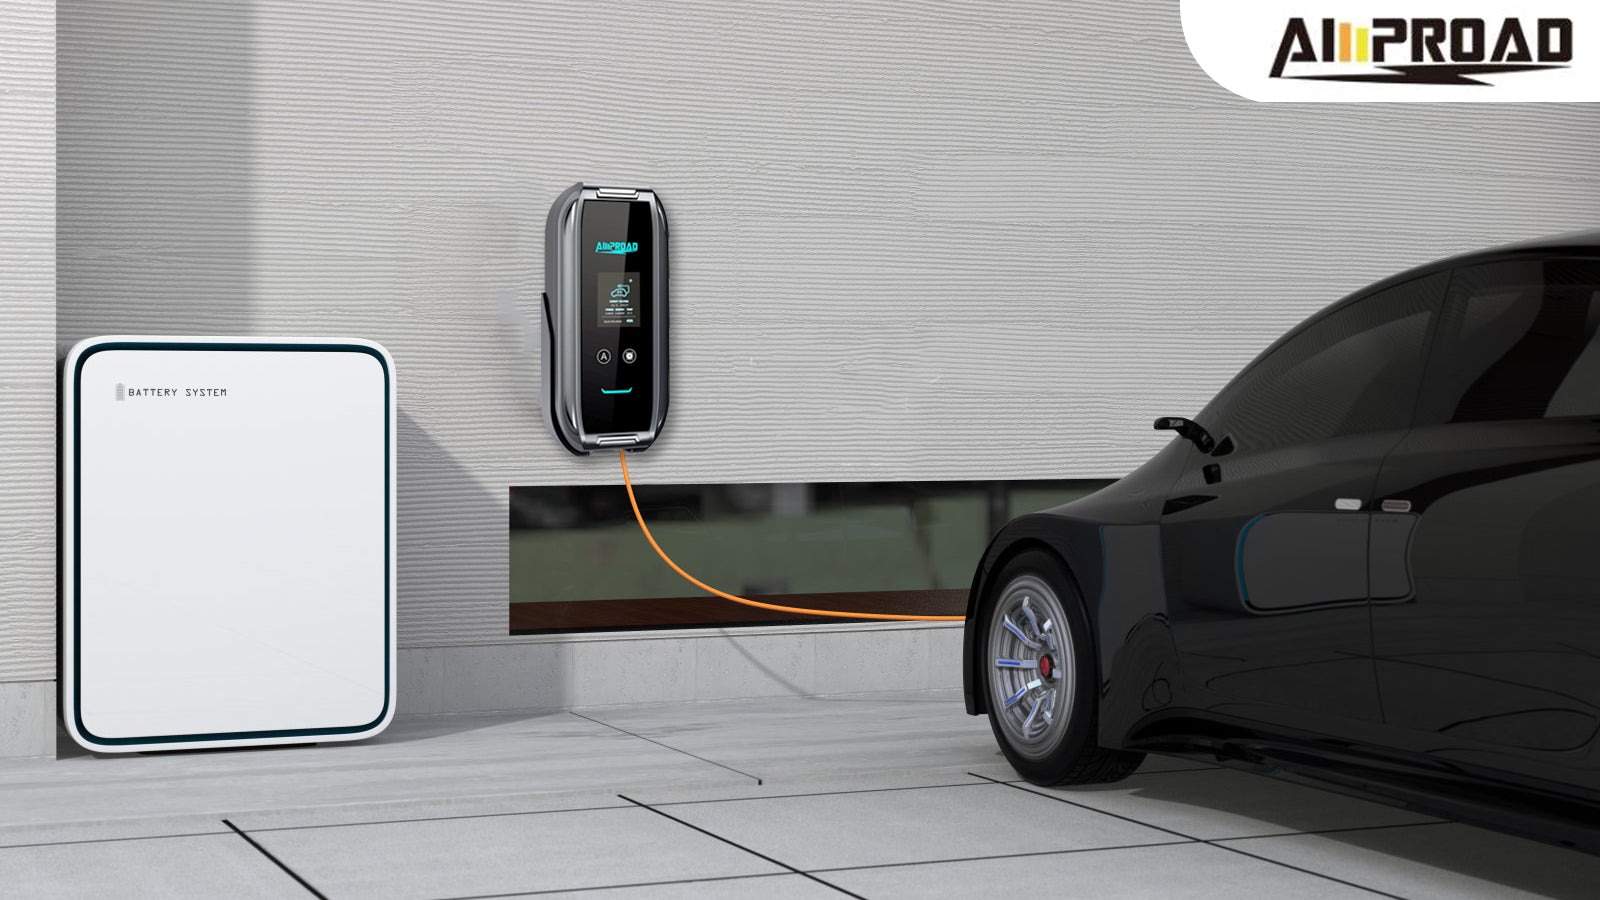 What are the misunderstanding of new energy vehicle charging?